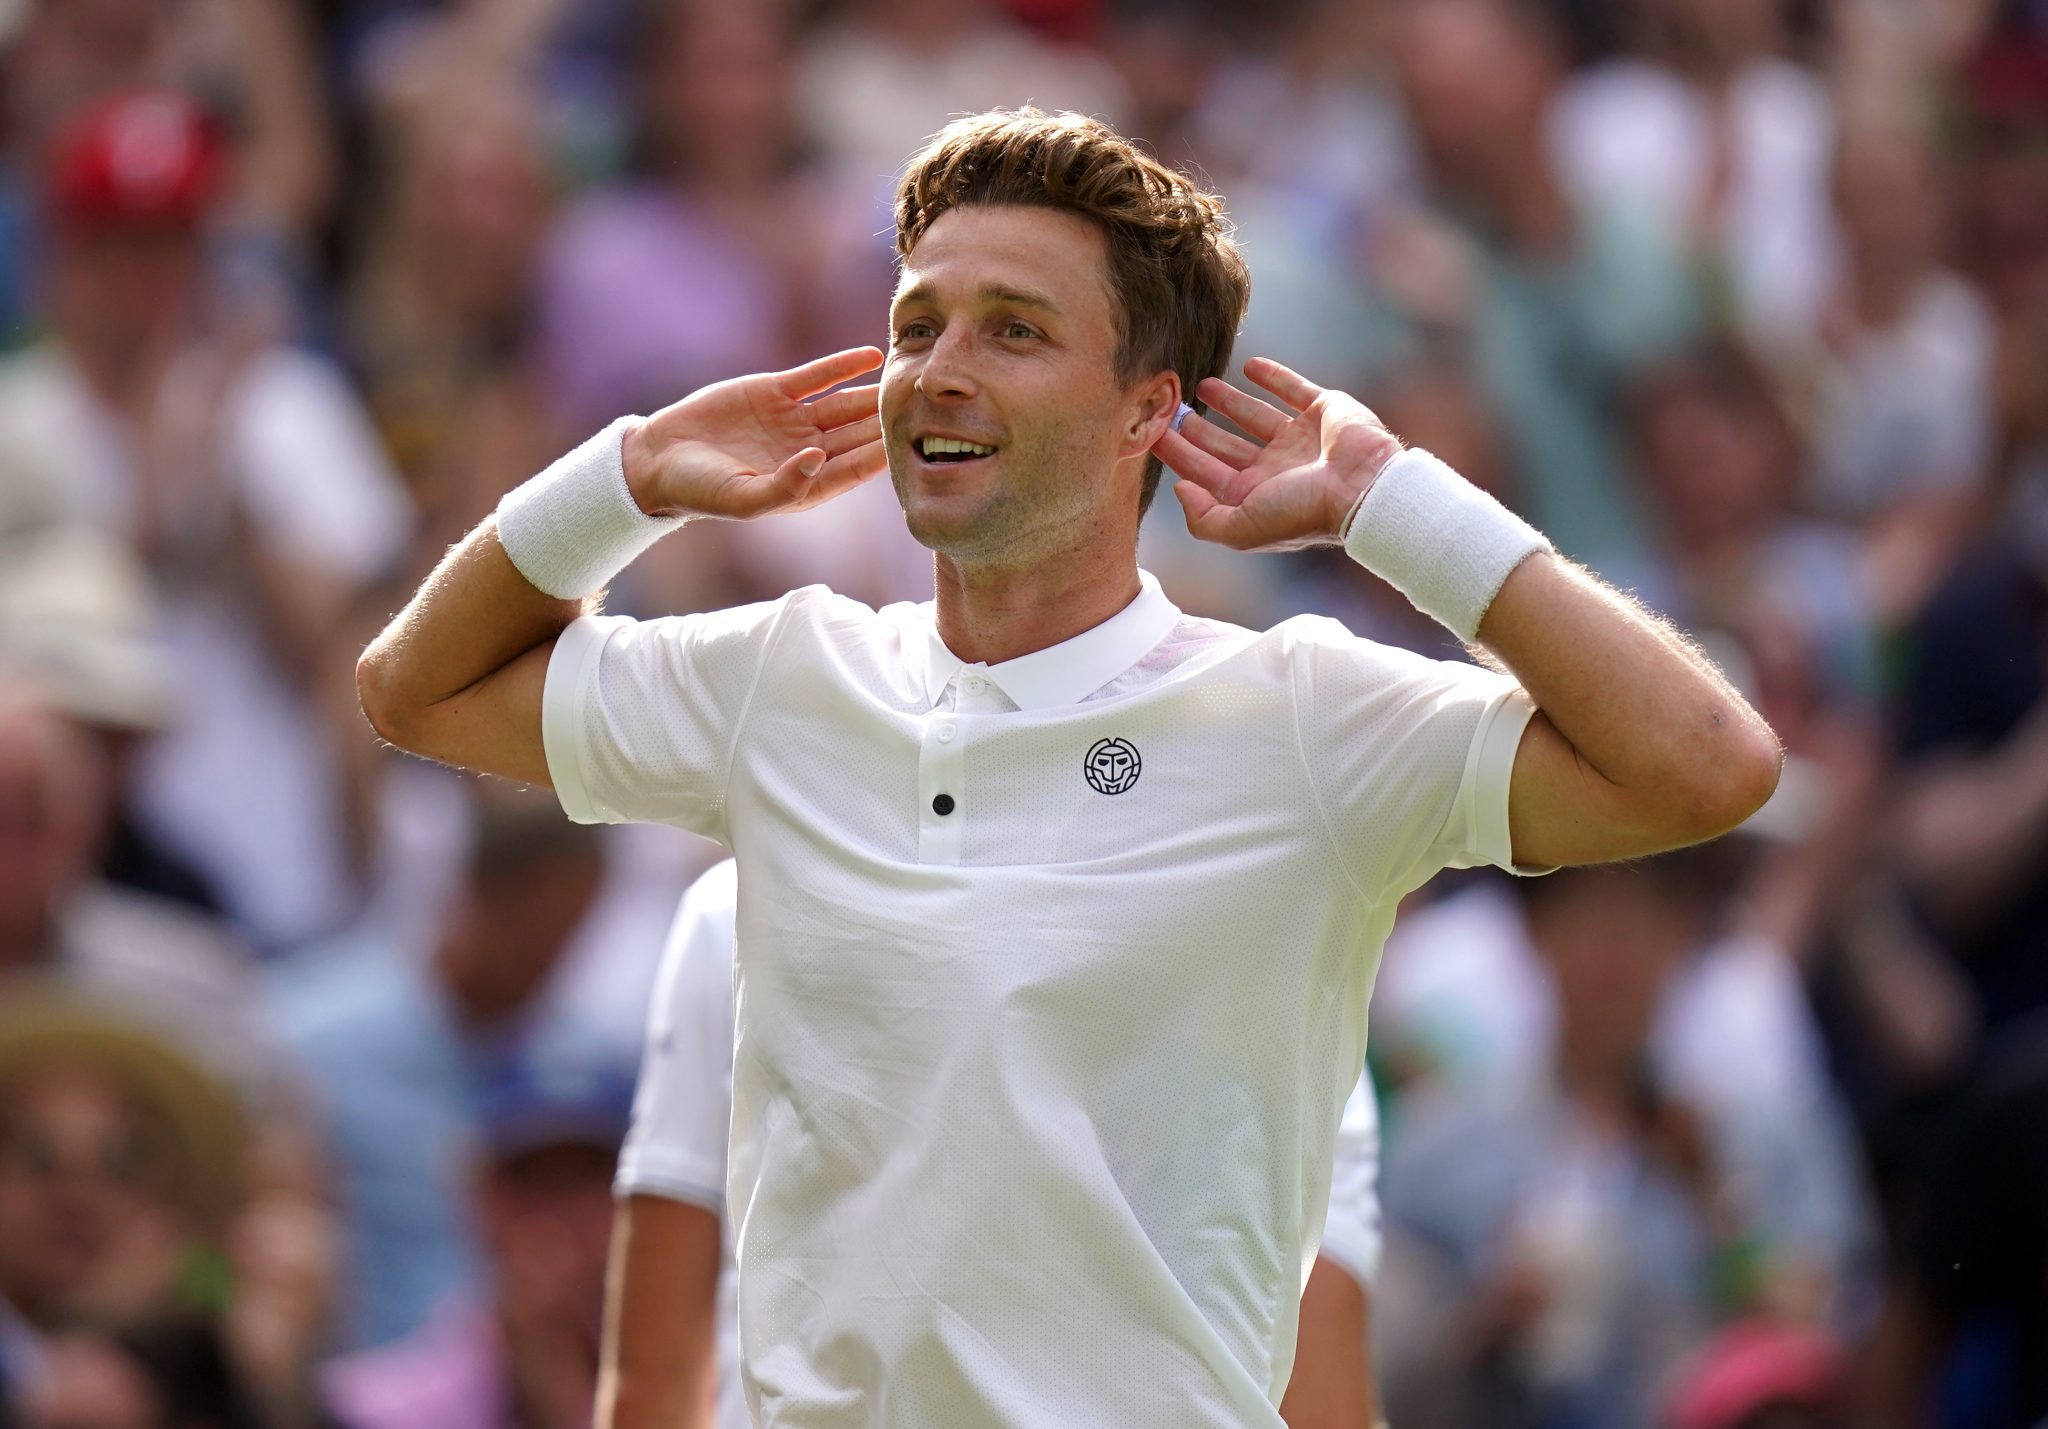 Liam Broady lives his childhood dream with epic Centre Court victory